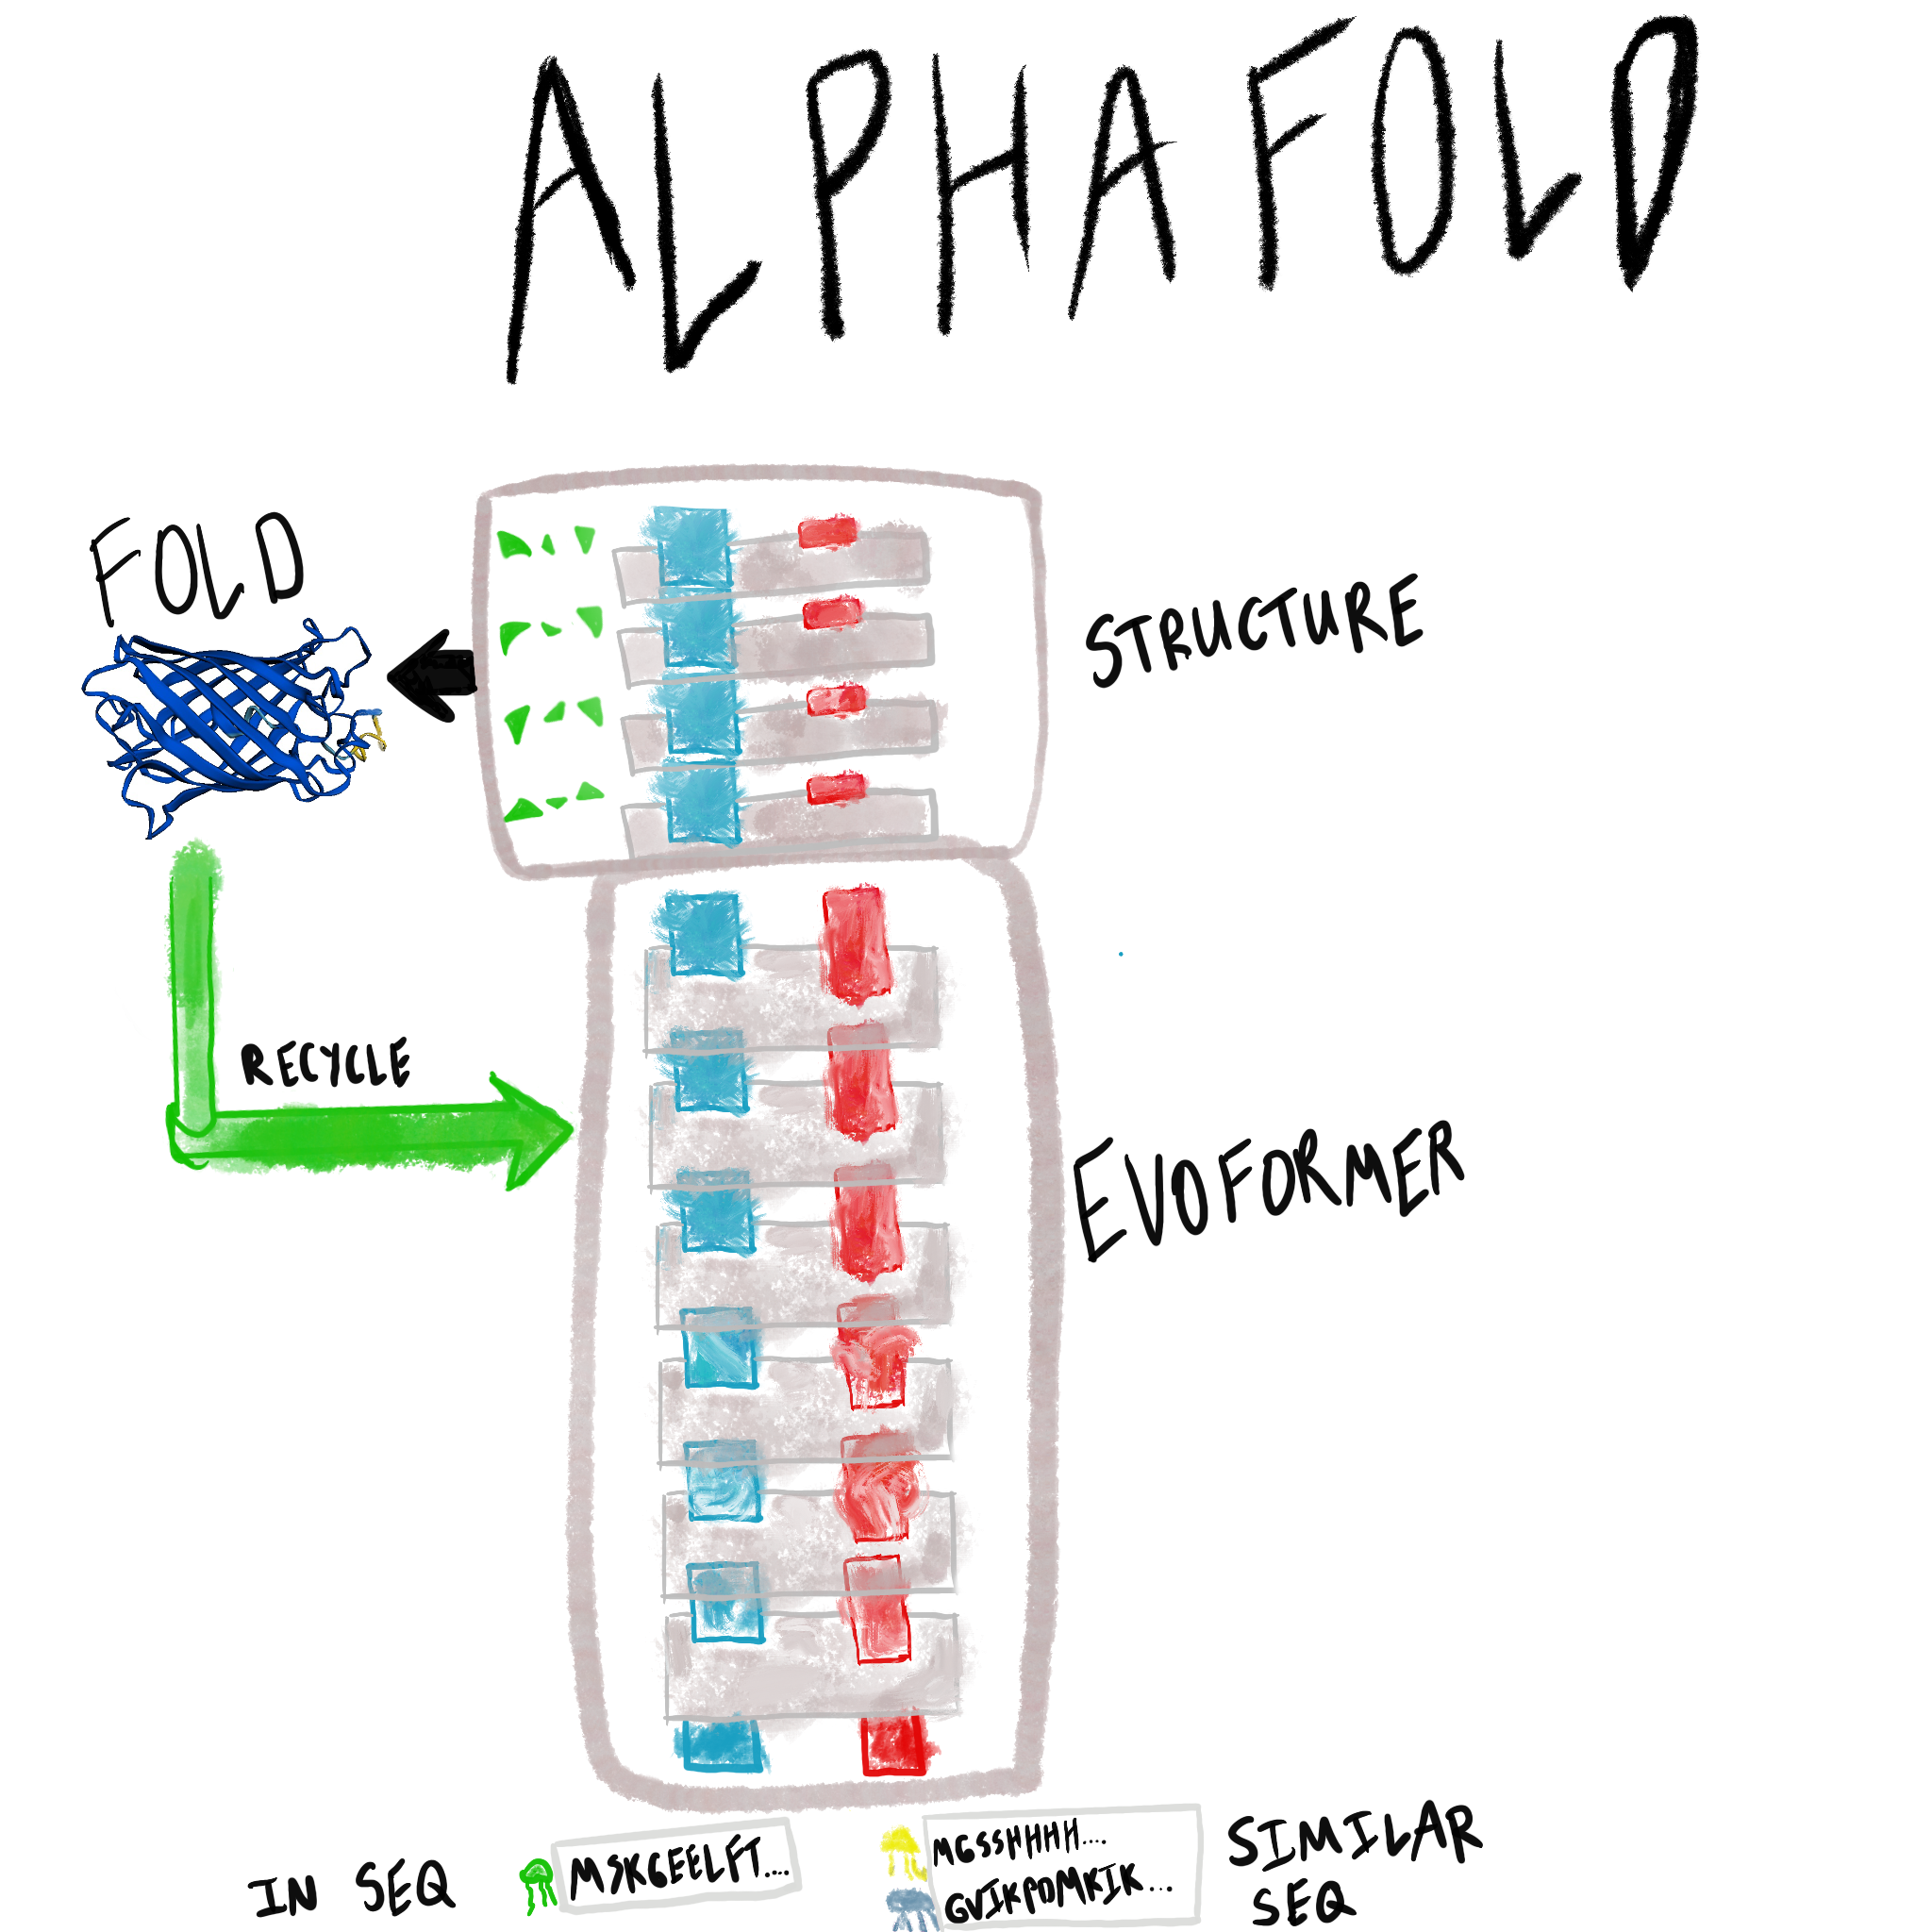 AlphaFold architecture. Input sequence (and evolutionarily similar sequences) flow into the Evoformer, which converts them into pair and MSA representations (respectively). Structure module emits a folded structure. Recycling enables multiple passes.